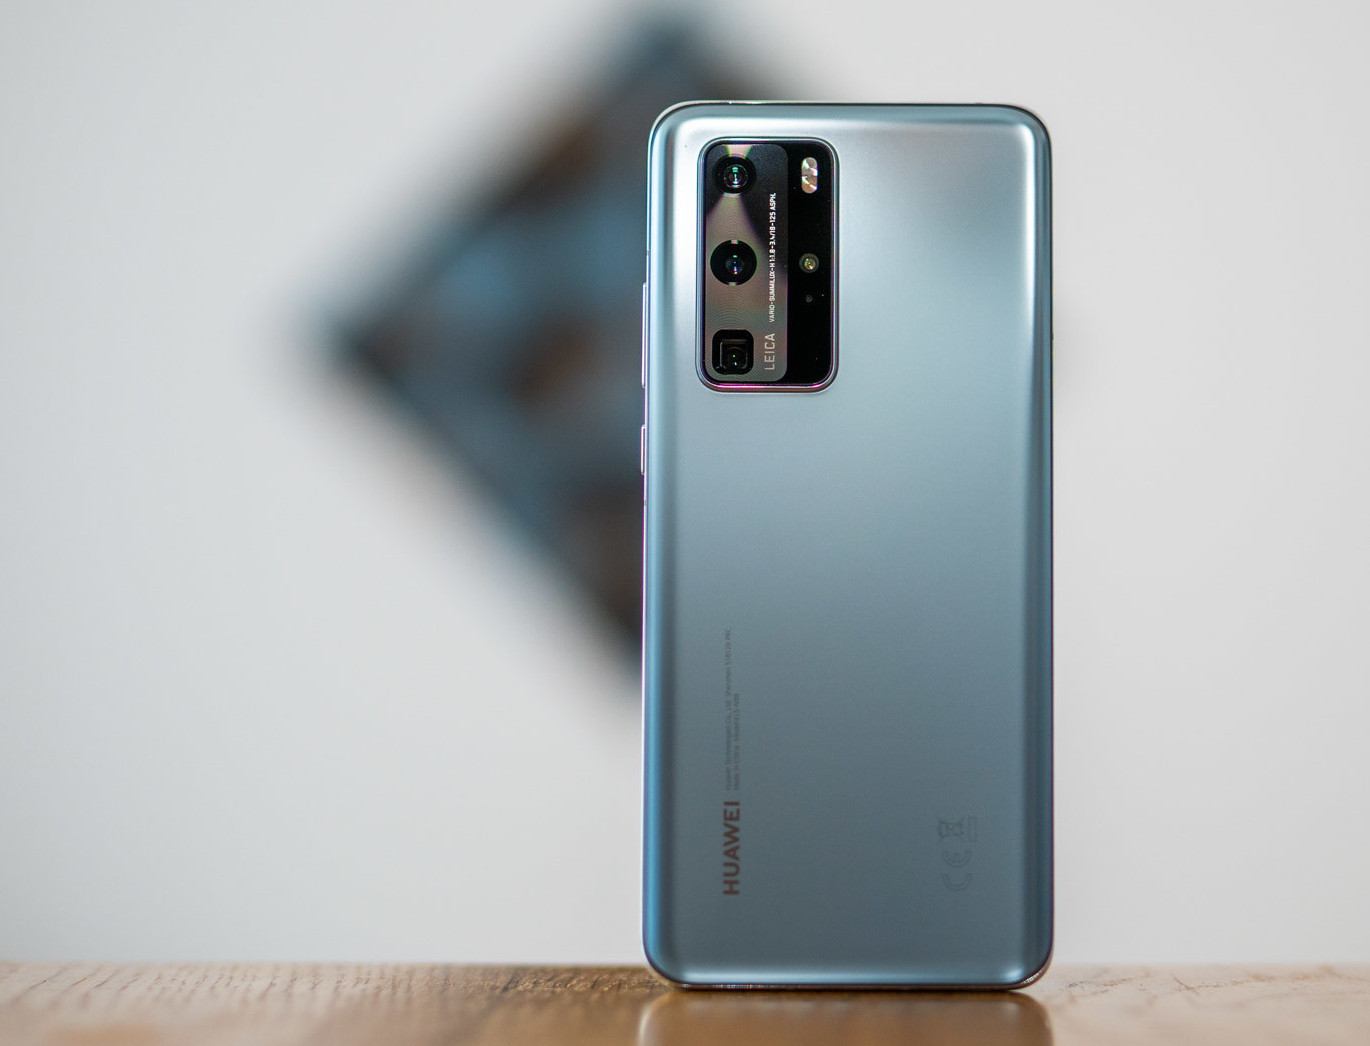 Overview of the smartphone Huawei P40 with advantages and disadvantages